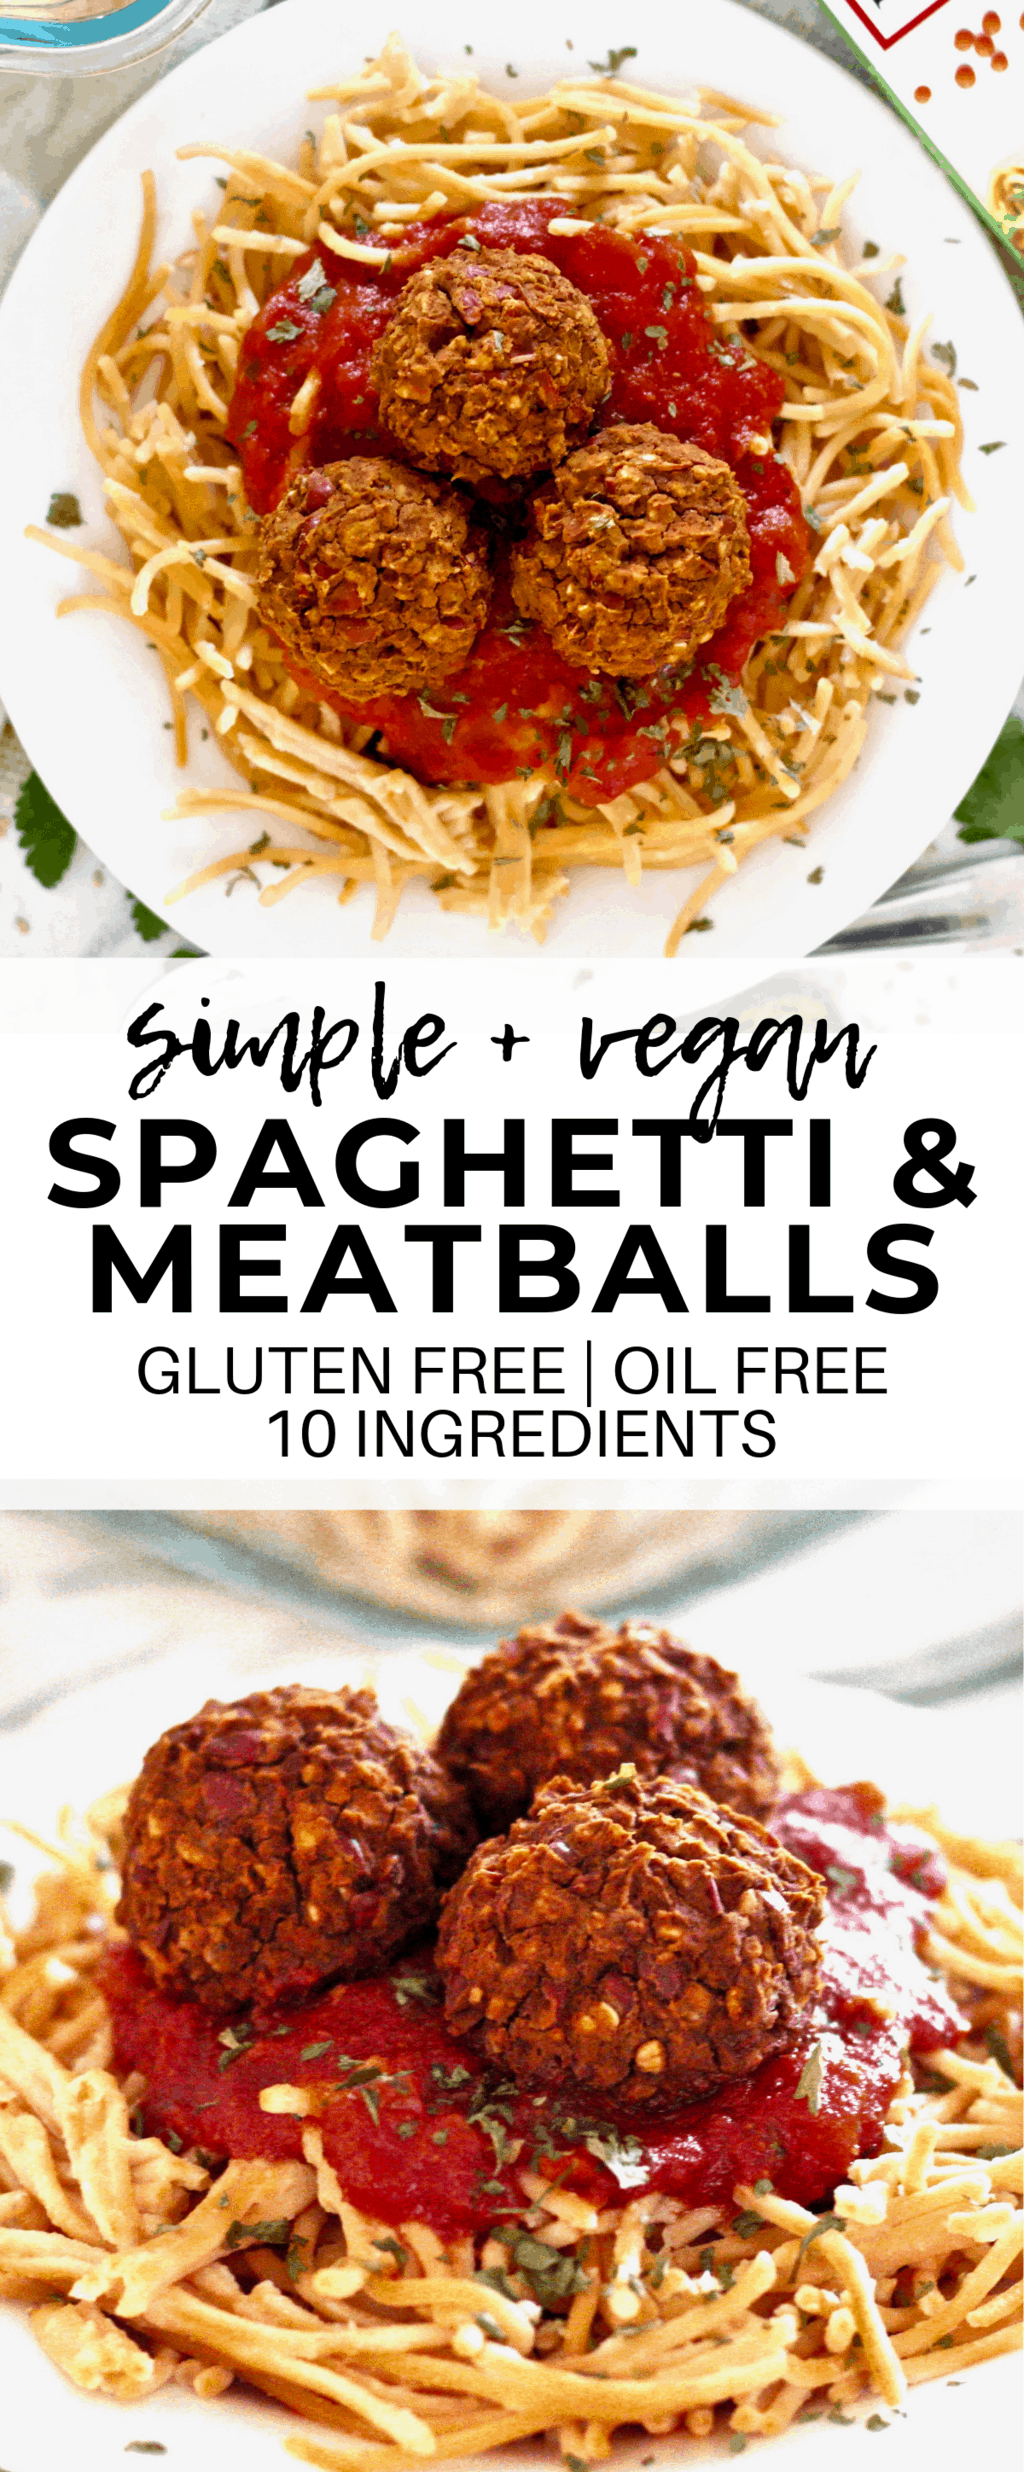 These simple Vegan Spaghetti and Meatballs are the ultimate comfort food! They are so easy to make with only 10 simple ingredients. Loaded with fiber and protein and also gluten-free, dairy-free, low-fat, and oil-free!